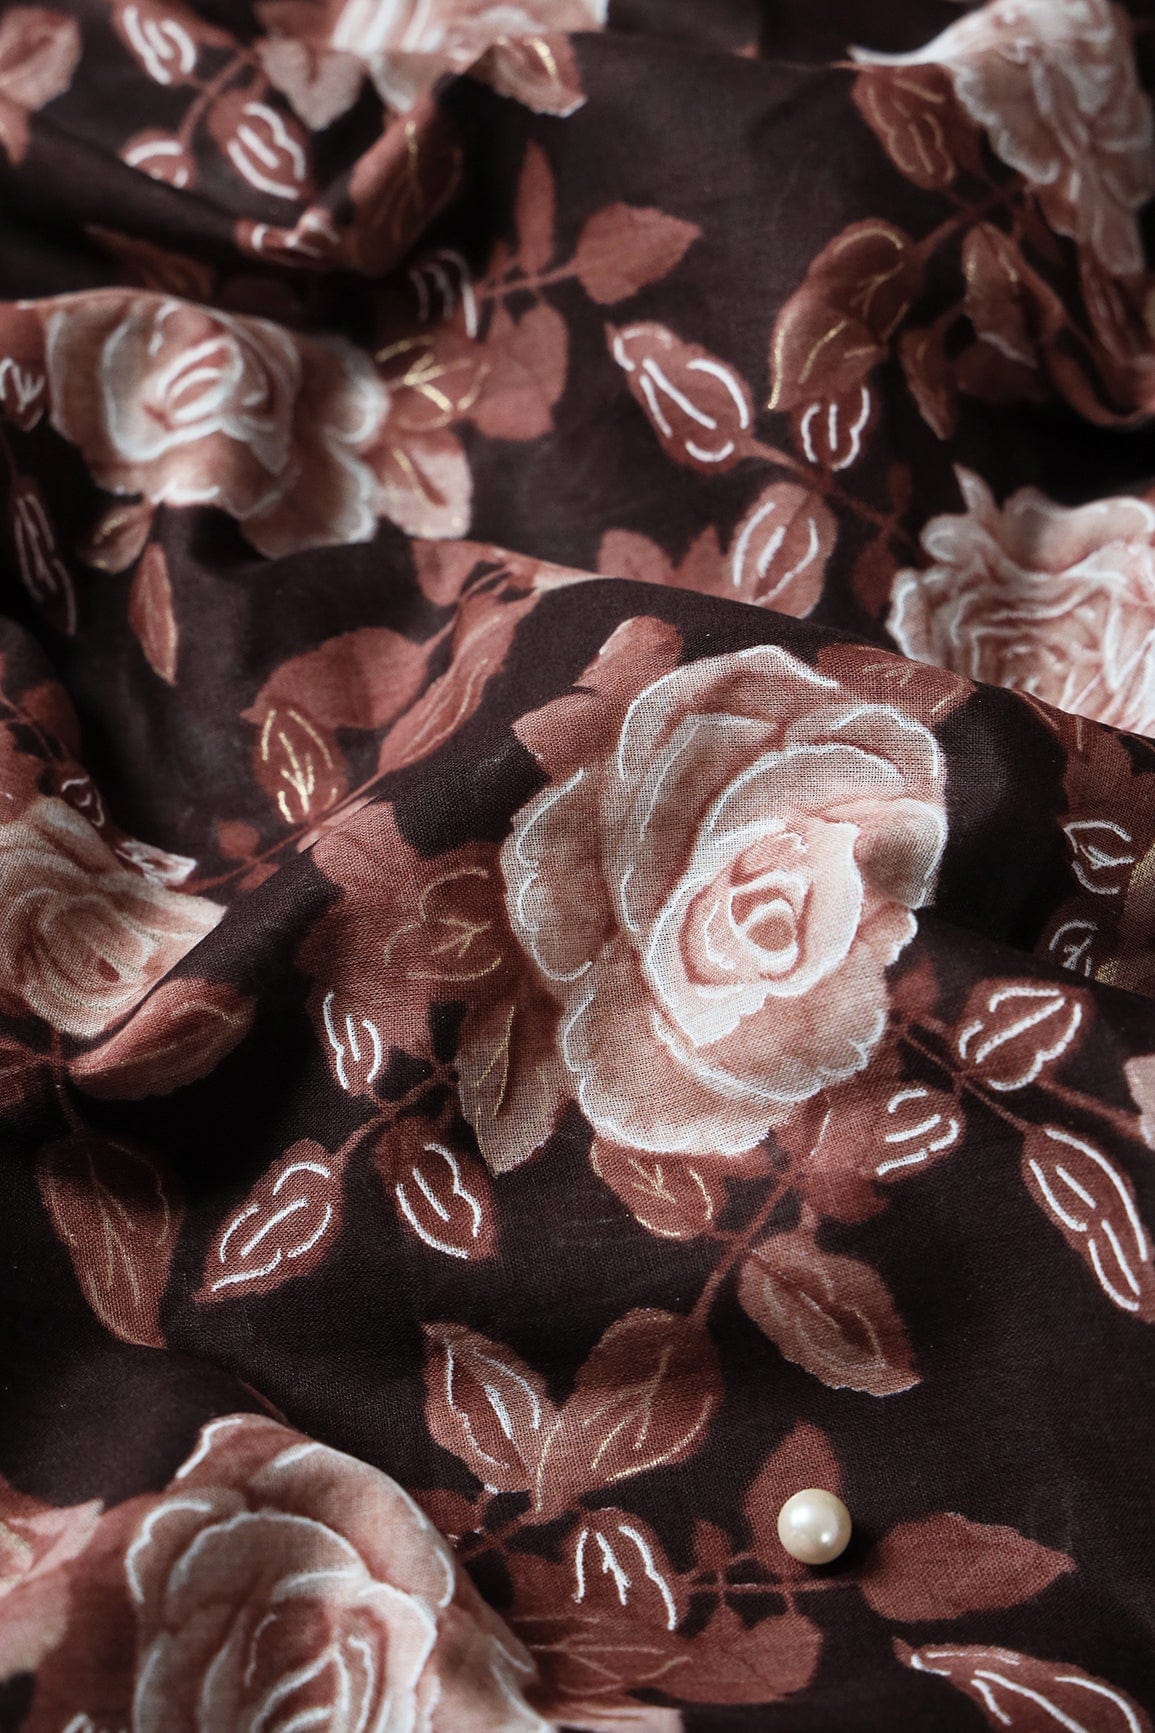 doeraa Prints White And Light Brown Floral Foil Print On Dark Brown Pure Mul Cotton Fabric